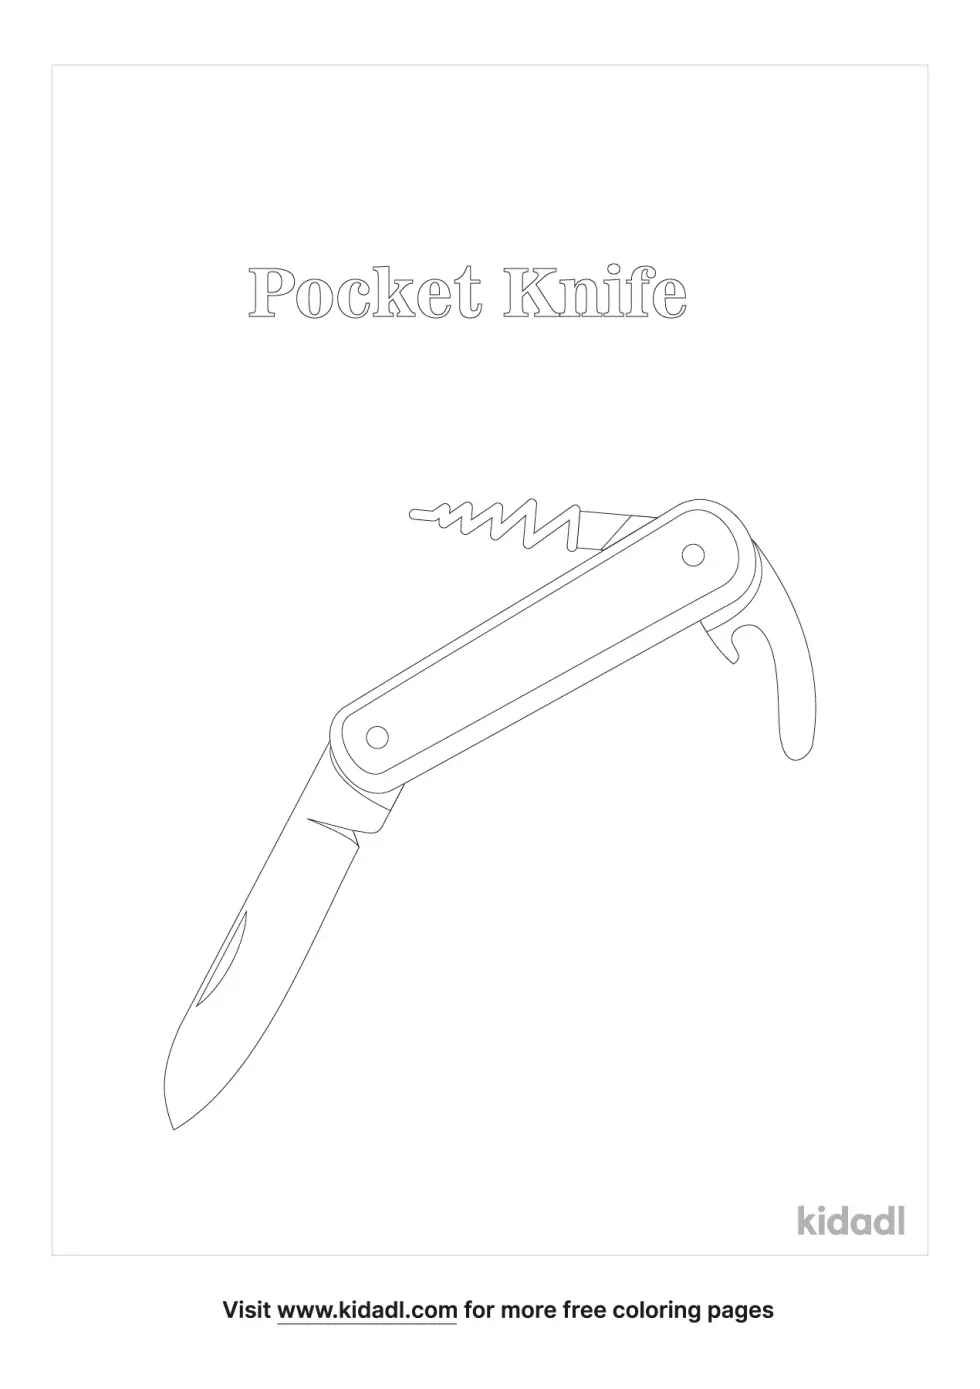 Pocket Knife Coloring Page